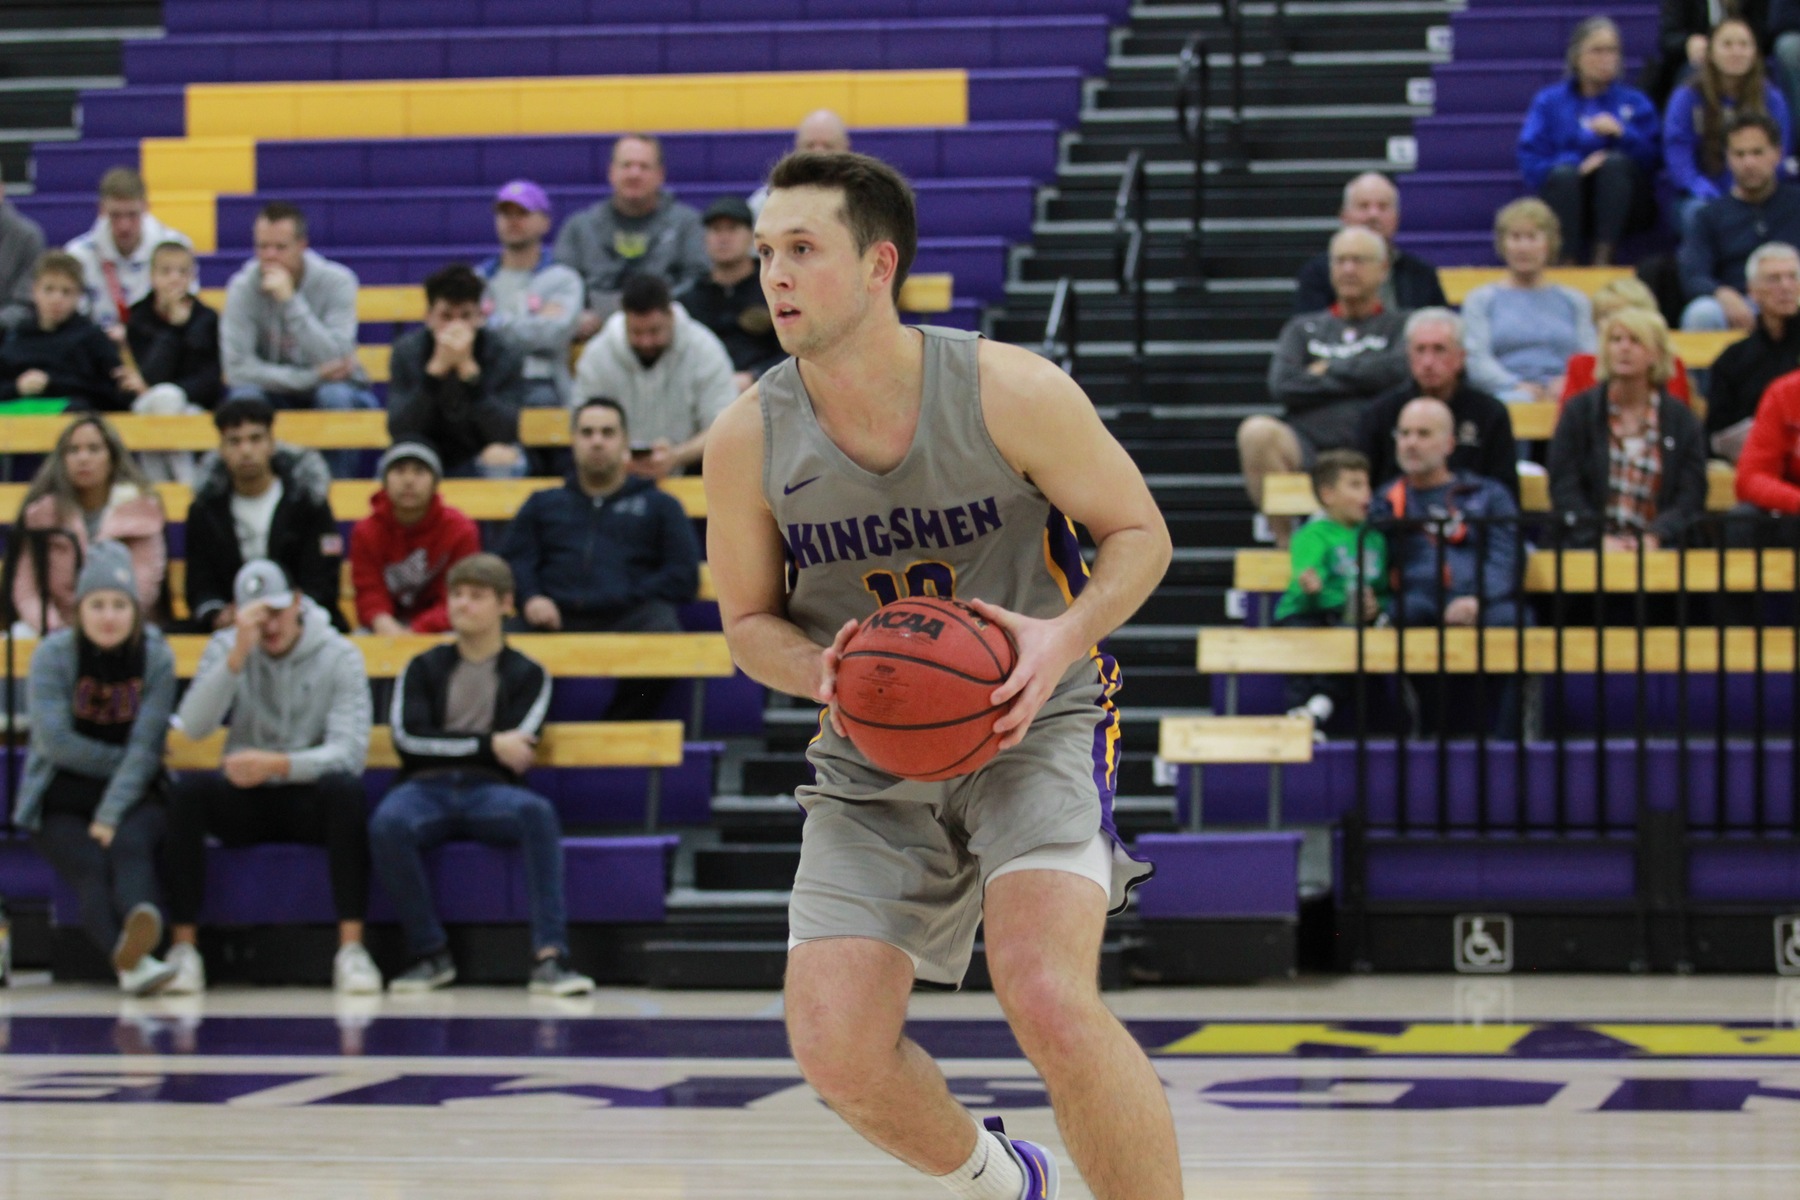 Connor Cole completed an important 'and-one' in the final minute to help end Cal Lutheran's five-game losing streak. (Photo Credit: Gabby Flores)